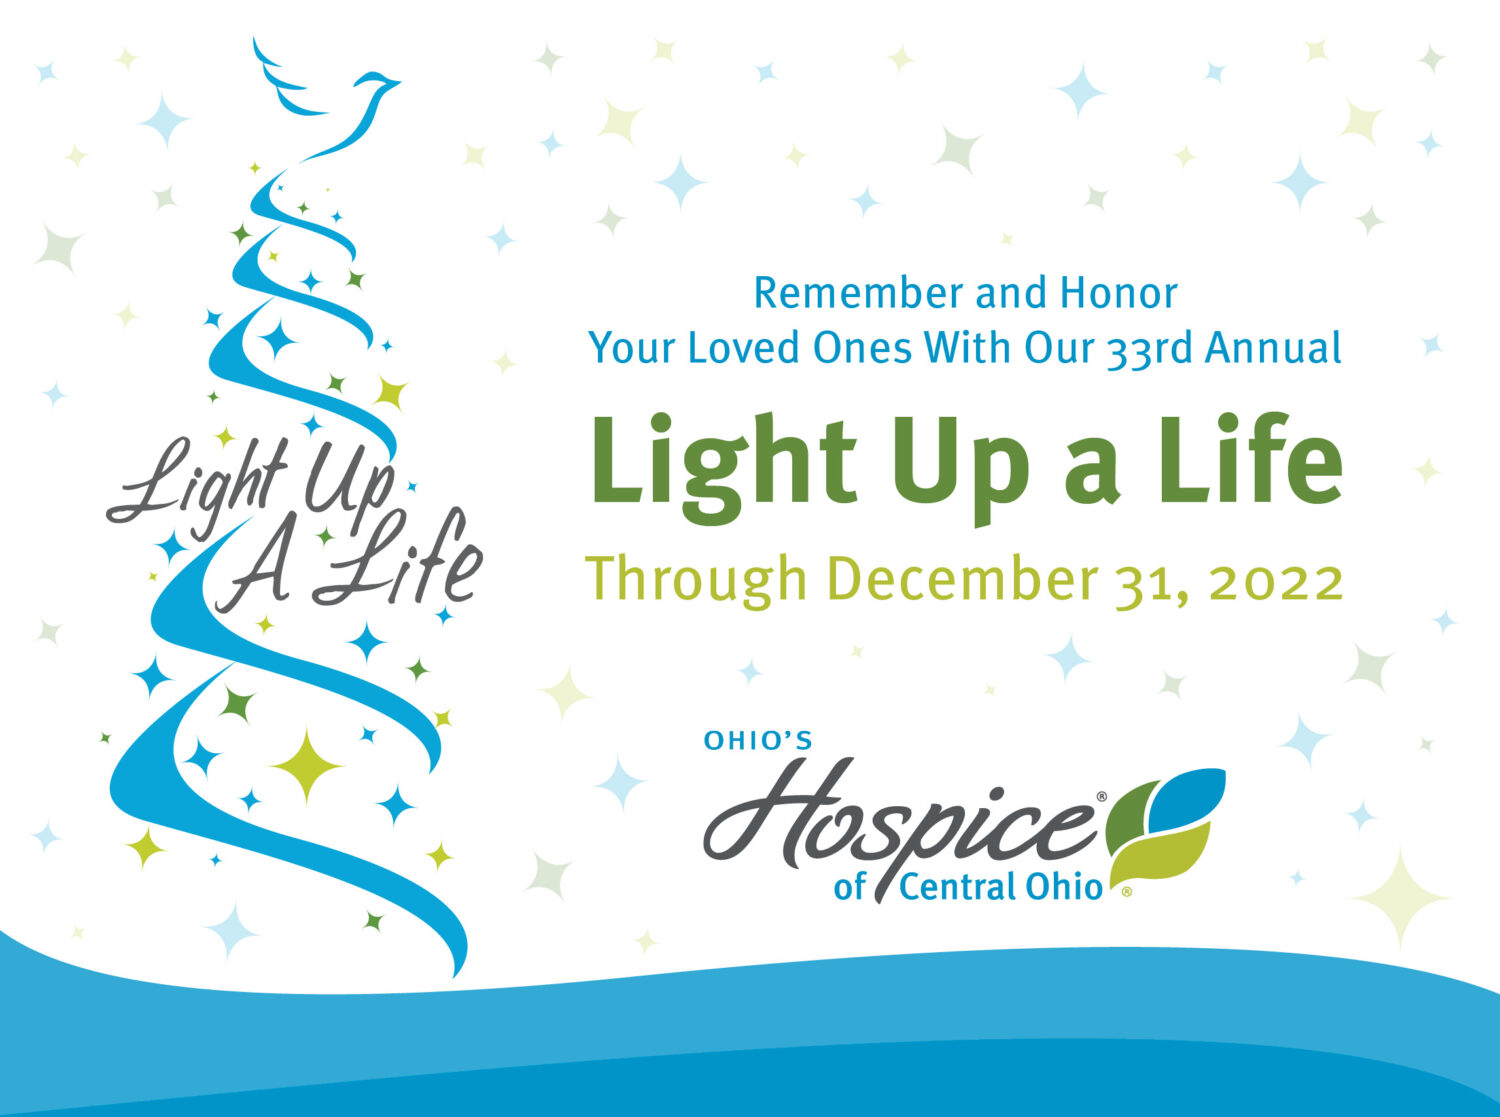 Remember and Honor Your Loved Ones With Our 33rd Annual Light Up a Life Through Dec. 31, 2022